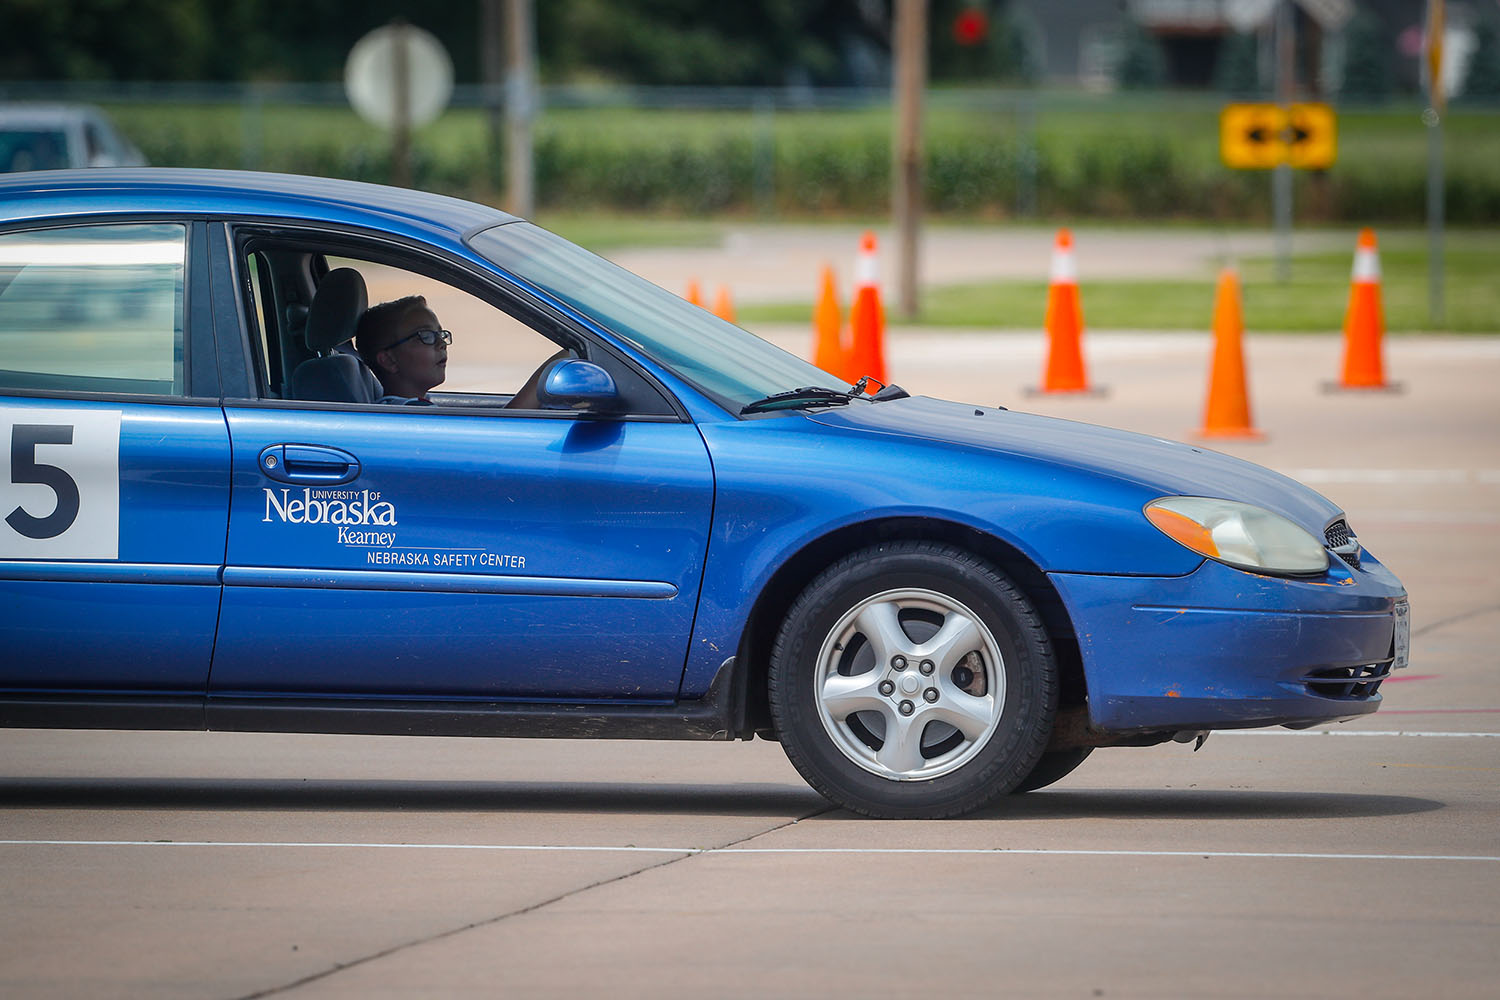 The Nebraska Safety Center is now offering driver education through an online format, allowing teens to participate in the program during the coronavirus pandemic. The program features online curriculum, followed by behind-the-wheel driving with a certified instructor. (Photos by Corbey R. Dorsey, UNK Communications)